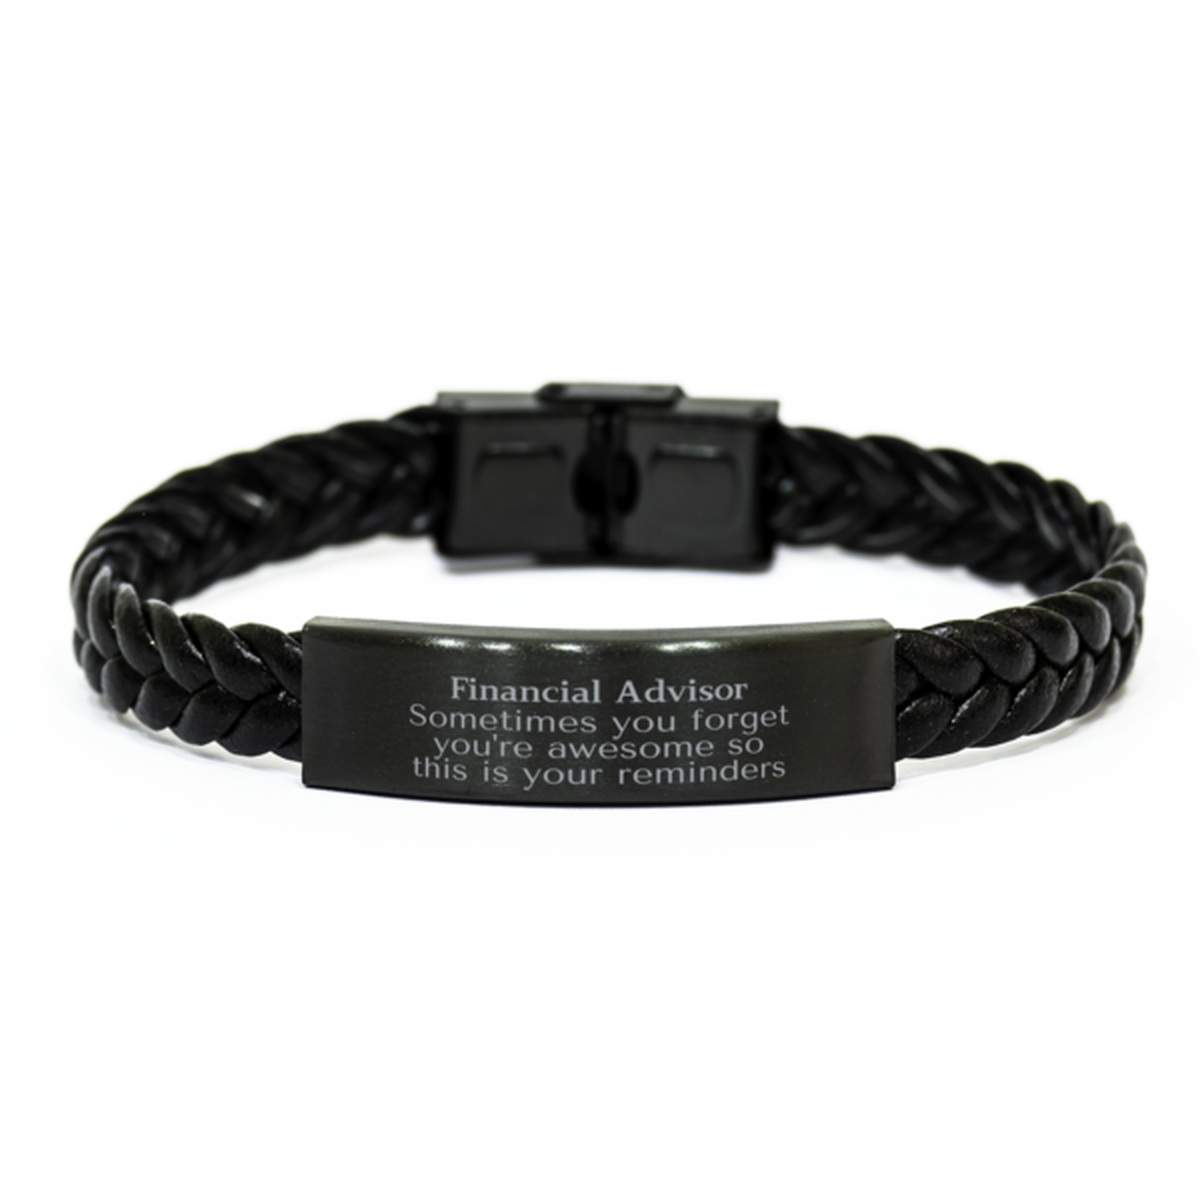 Sentimental Financial Advisor Braided Leather Bracelet, Financial Advisor Sometimes you forget you're awesome so this is your reminders, Graduation Christmas Birthday Gifts for Financial Advisor, Men, Women, Coworkers